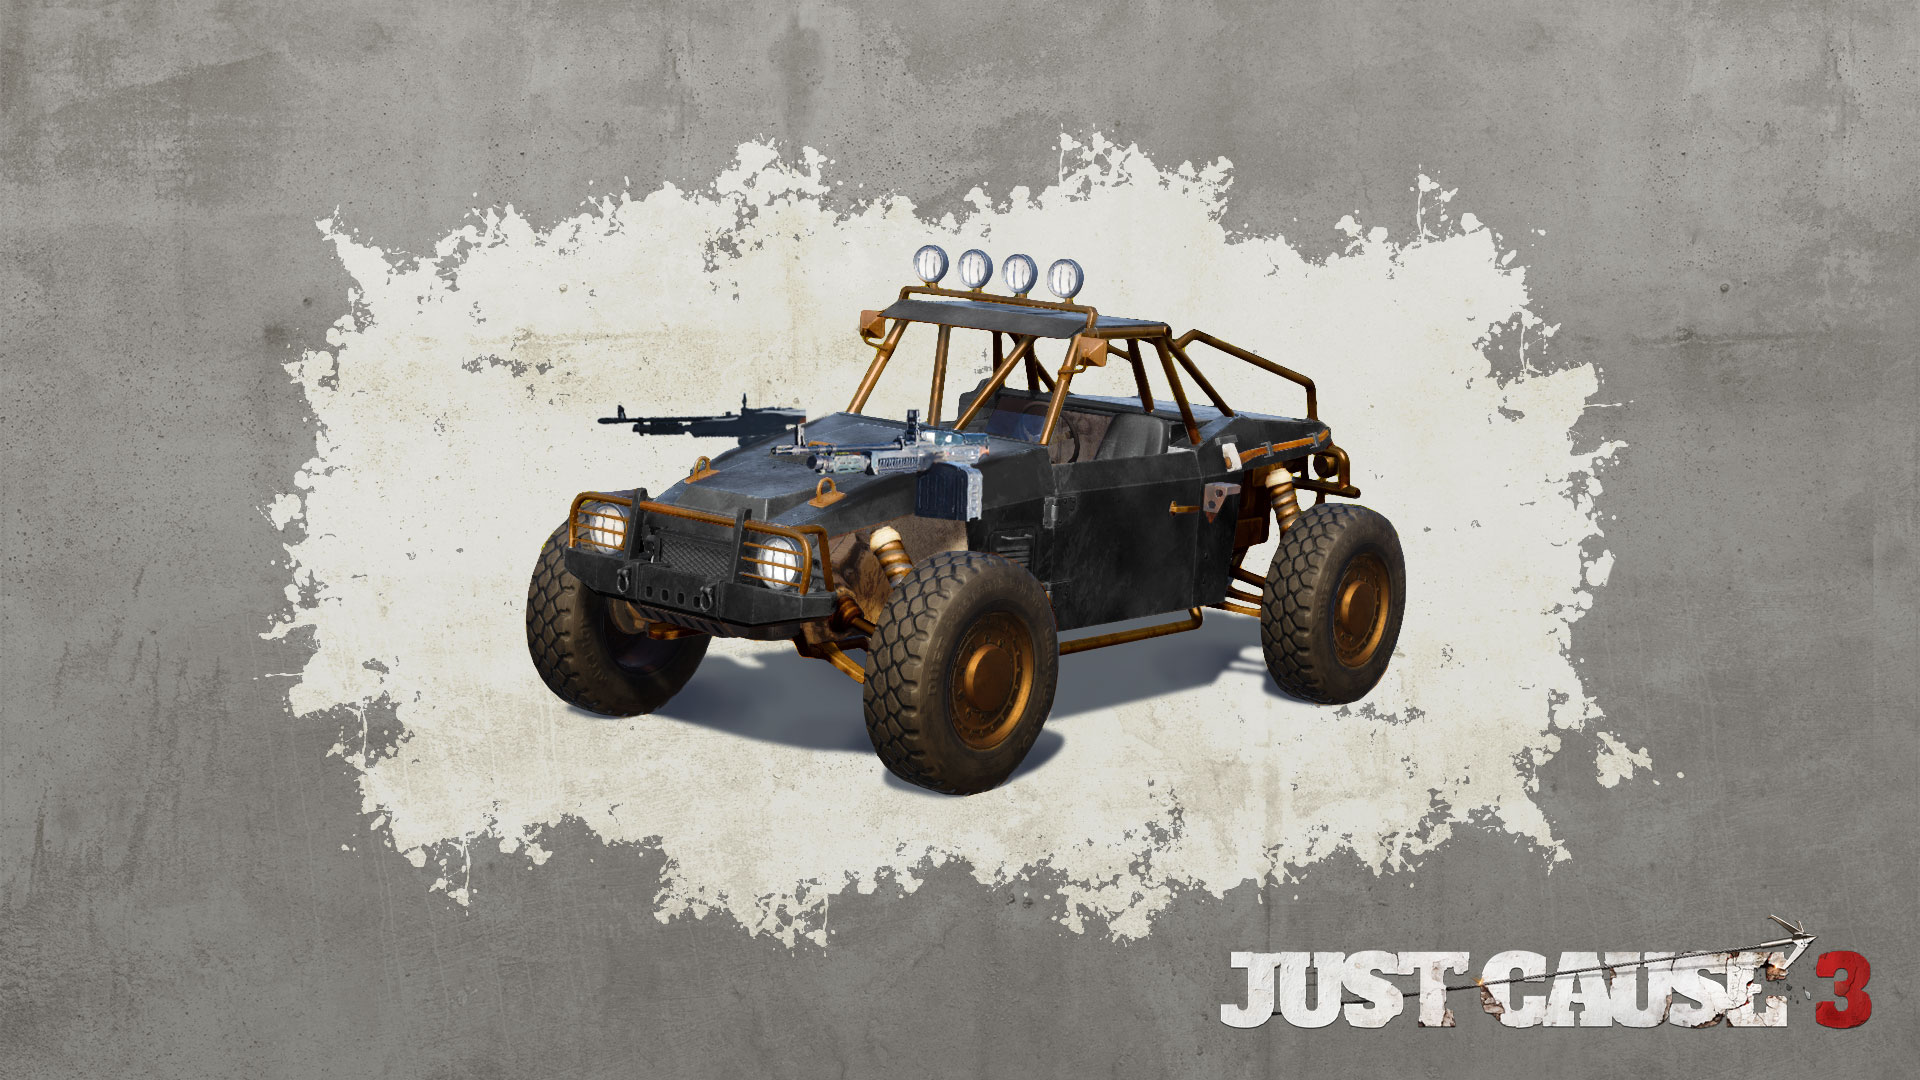 Just Cause™ 3 - Combat Buggy Featured Screenshot #1